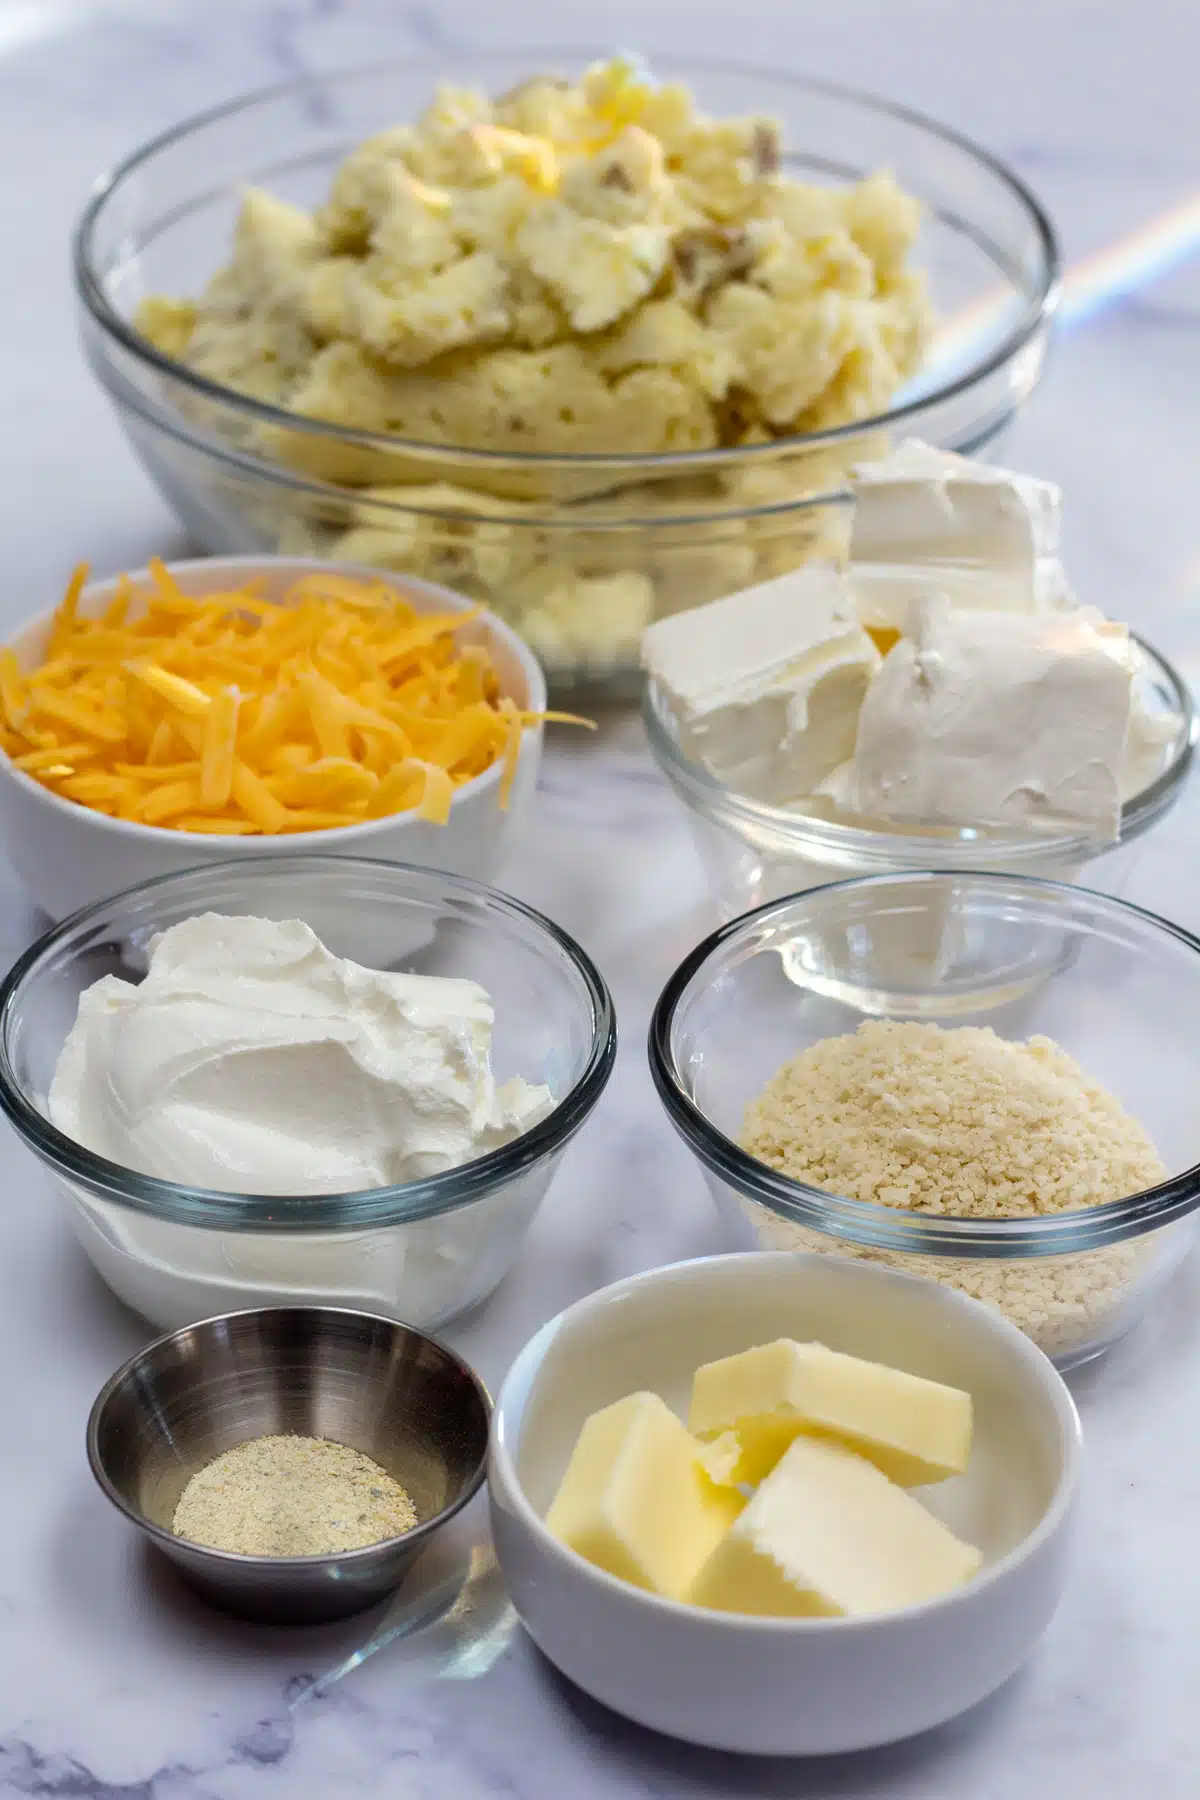 Tall image showing ingredients needed for mashed potato casserole.